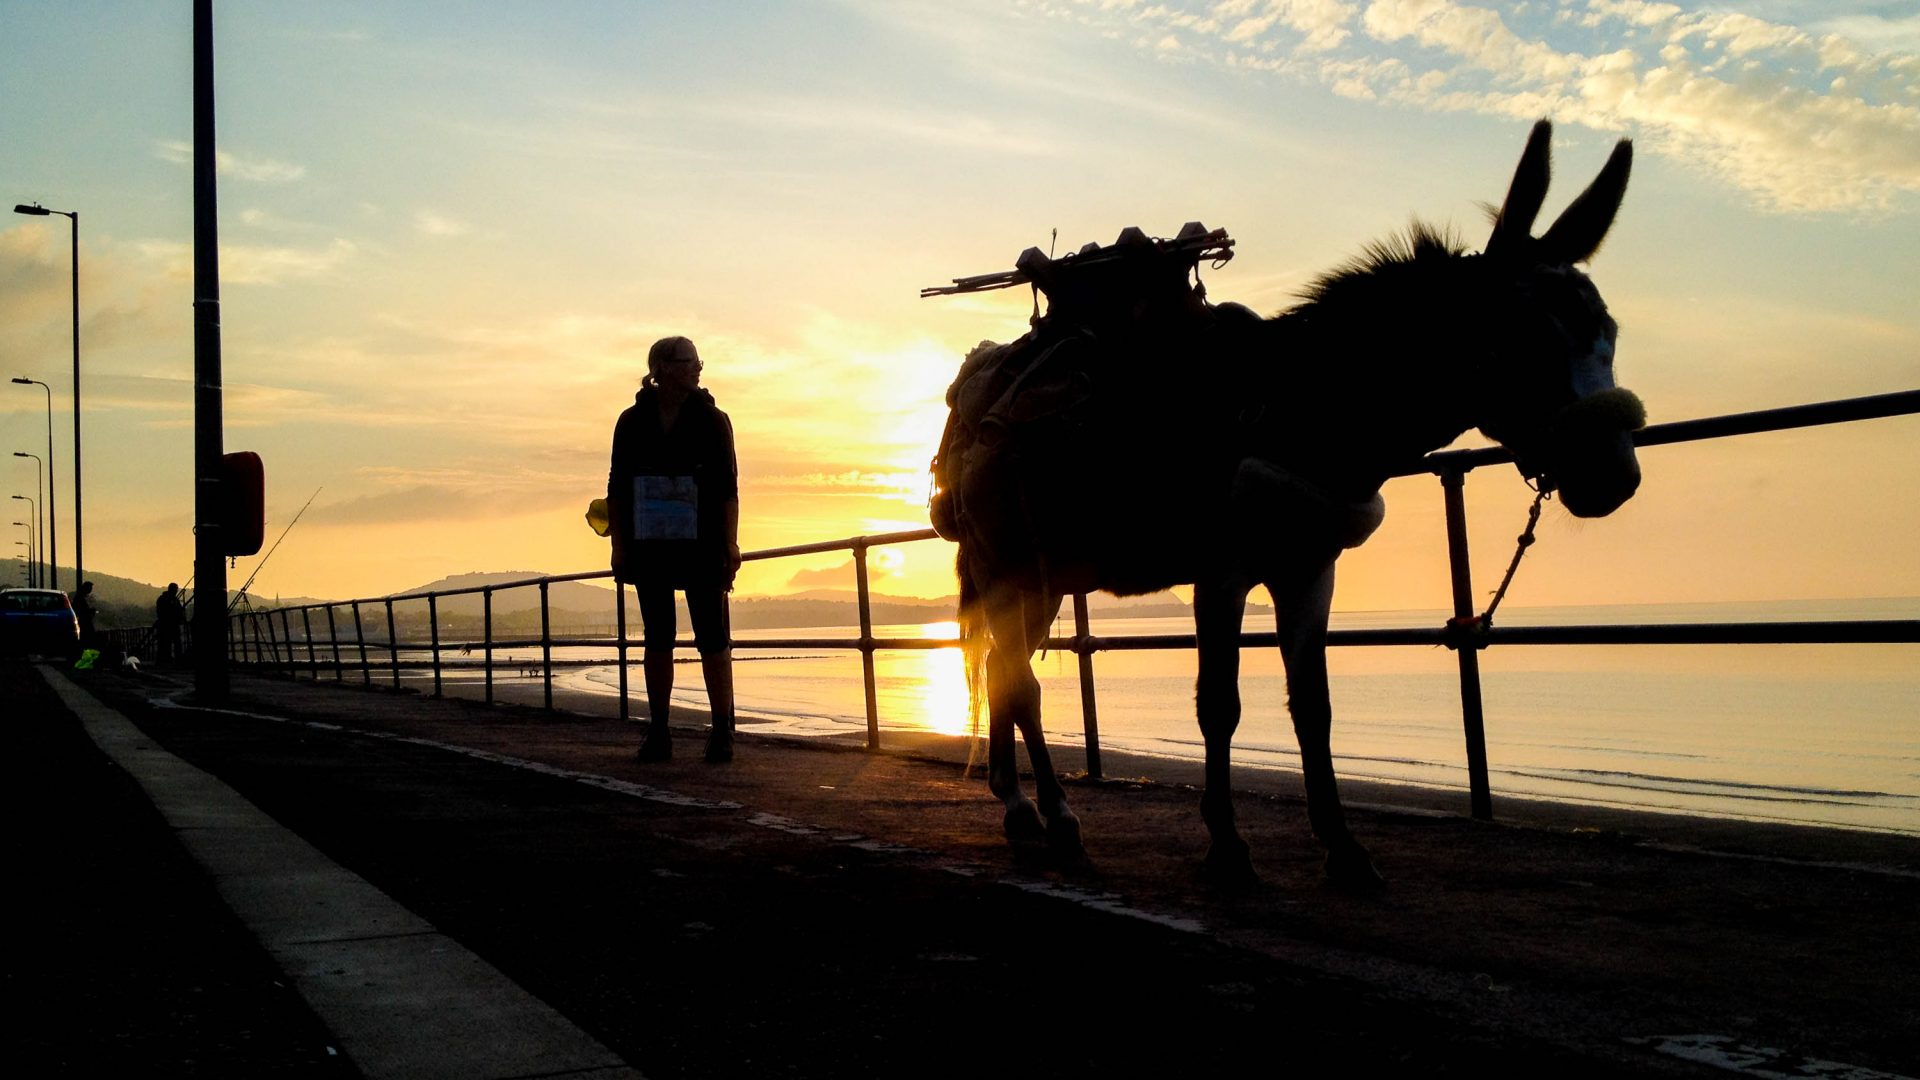 Hannah Engelkamp and her donkey Chico silhouetted against the sky.